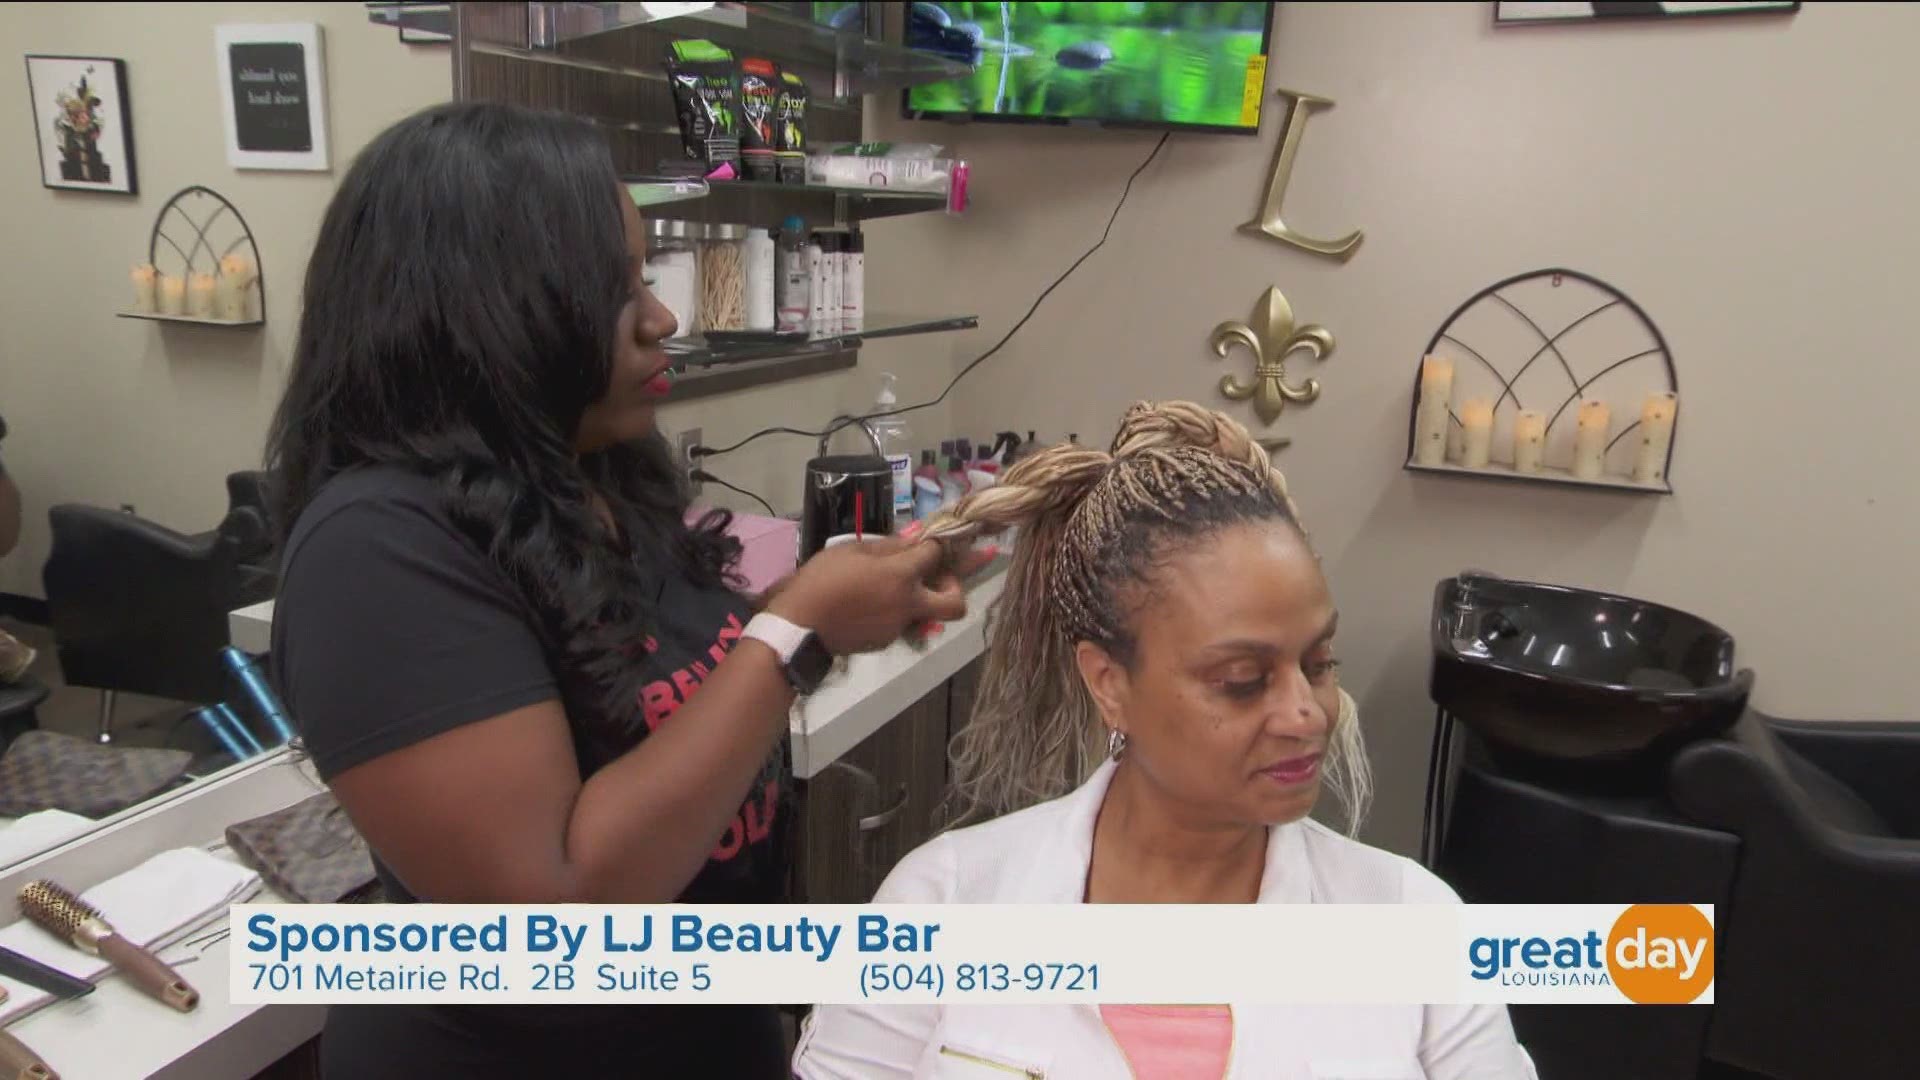 LJ Beauty Bar is more than your average blow dry bar. Owner, Shalanta Jackson, is now offering color application, keratin treatments, waxing and so much more!